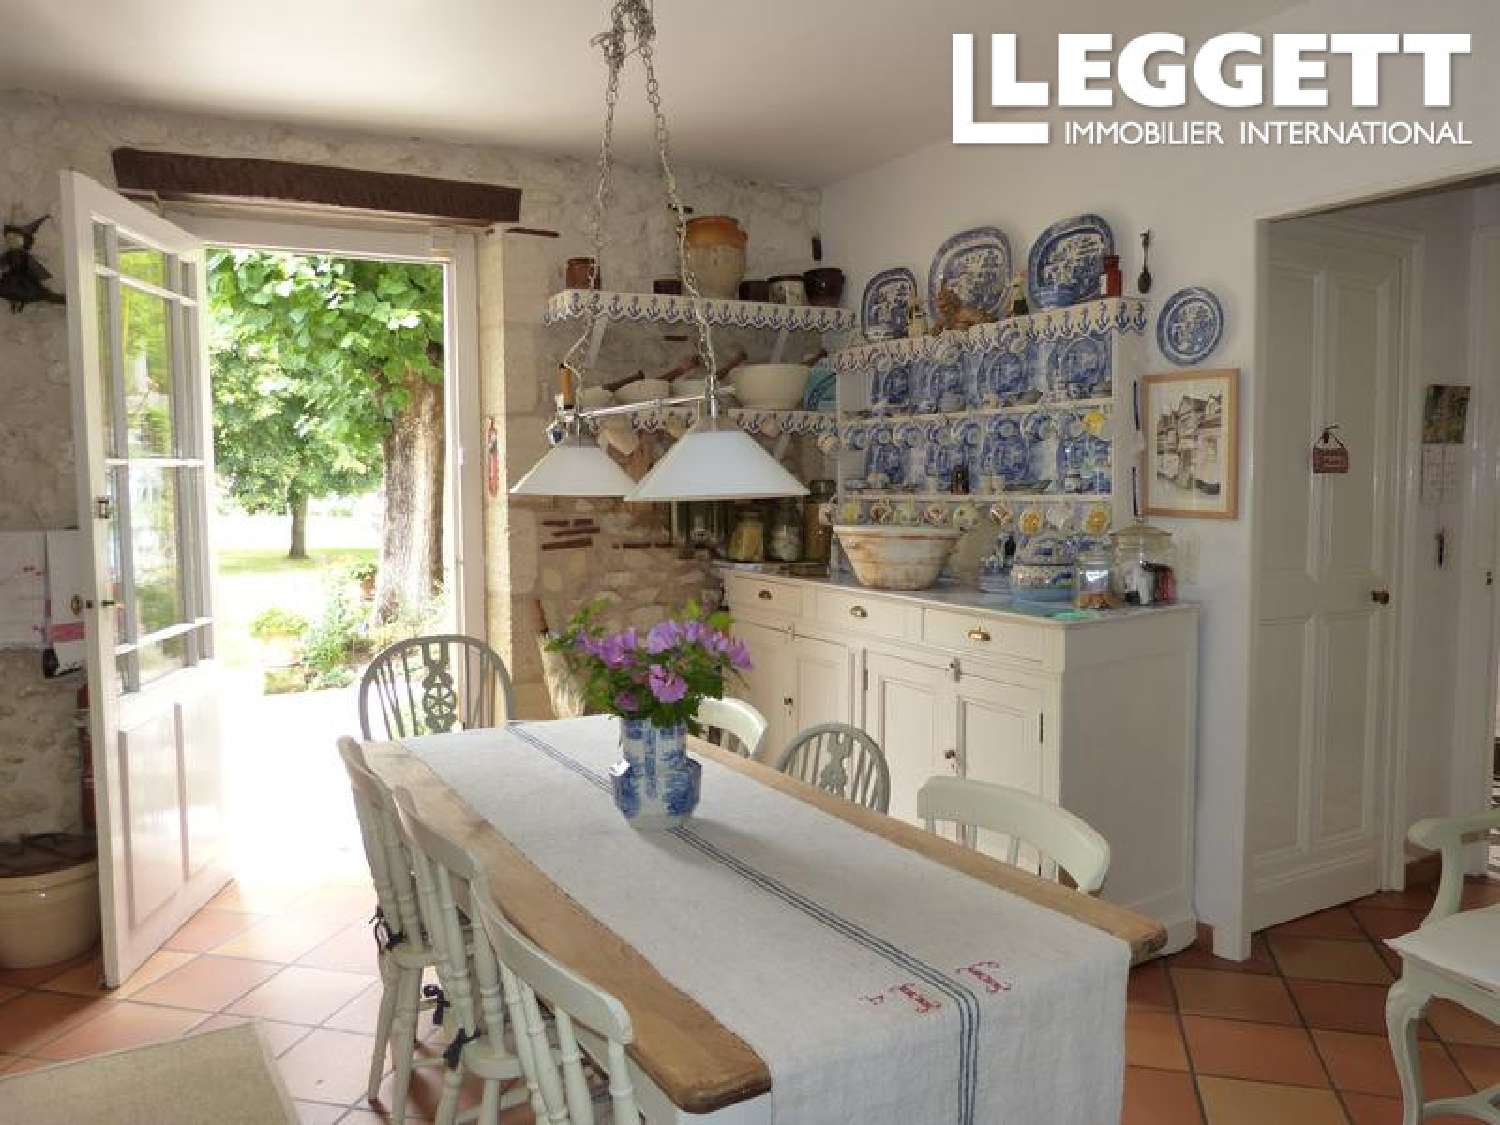  à vendre maison bourgeoise Pineuilh Gironde 5